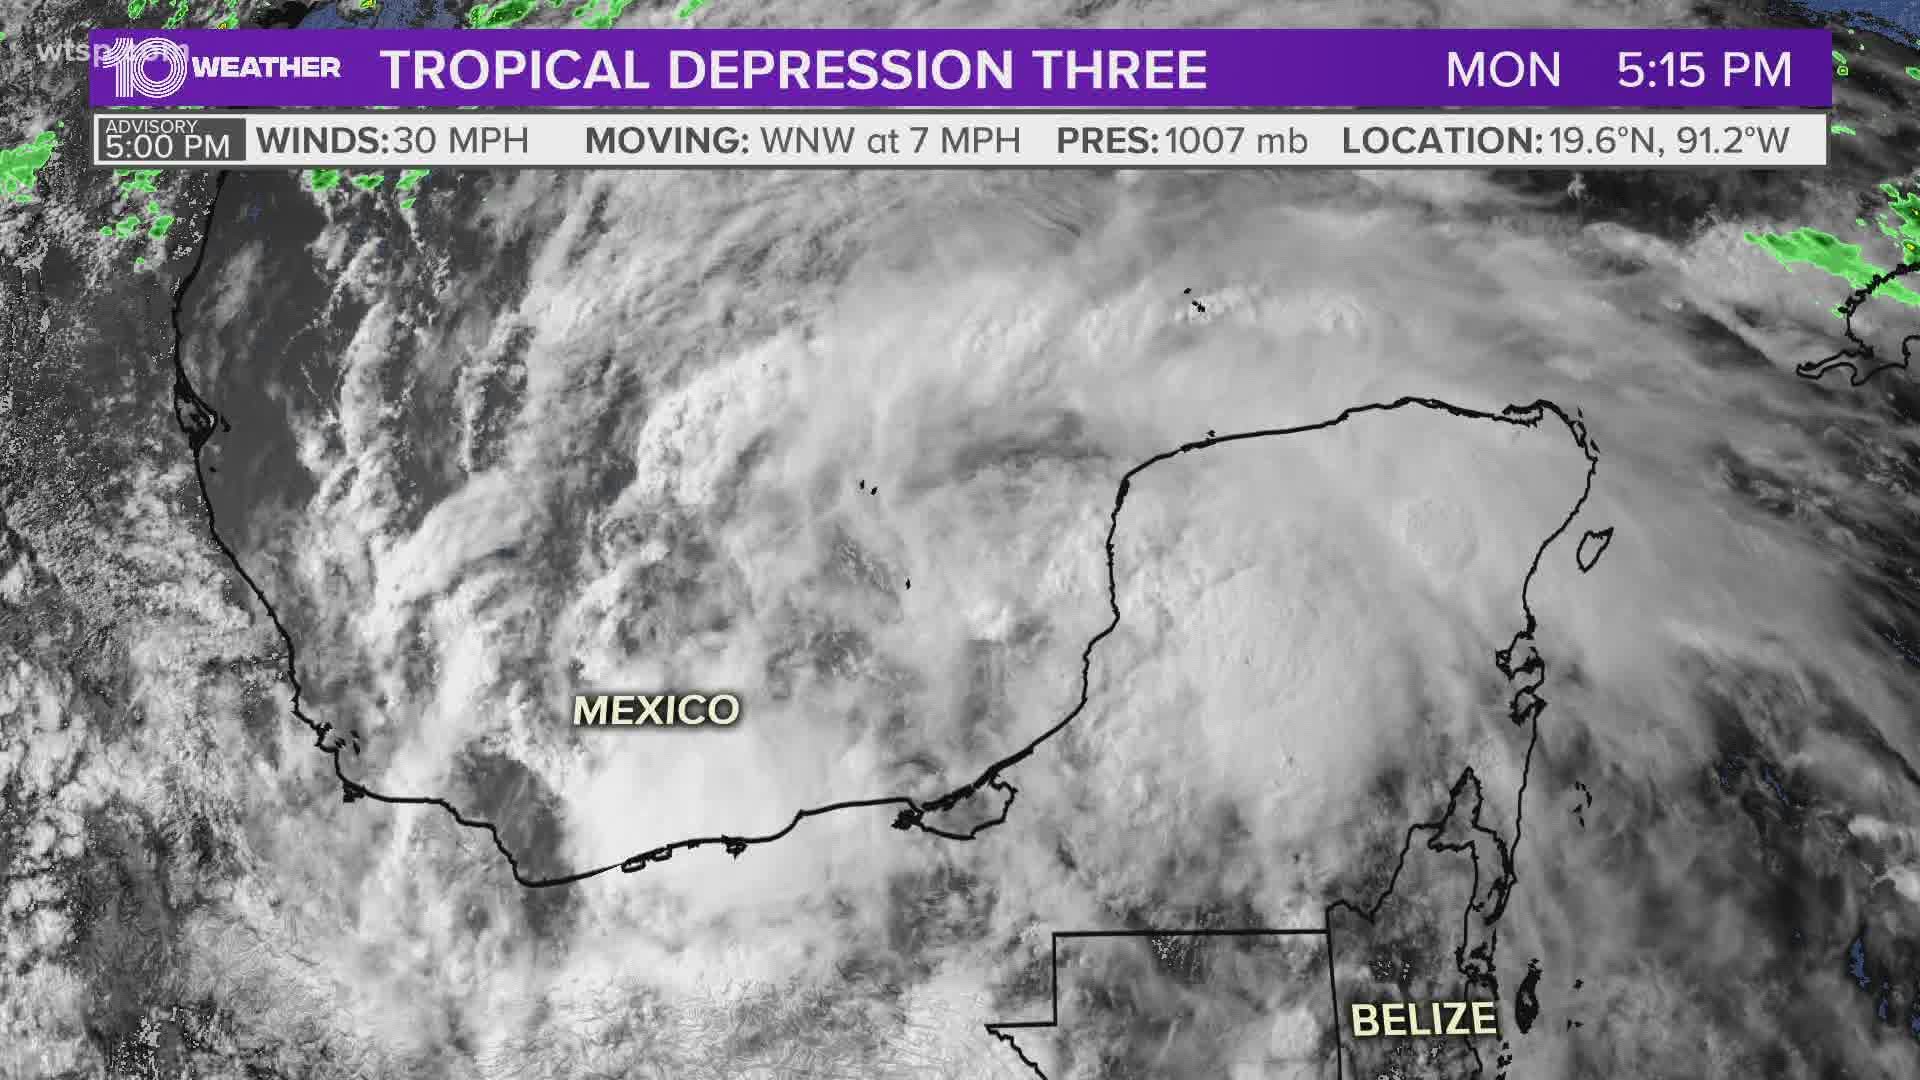 The next tropical system in what already has been an active 2020 Atlantic hurricane season has formed.